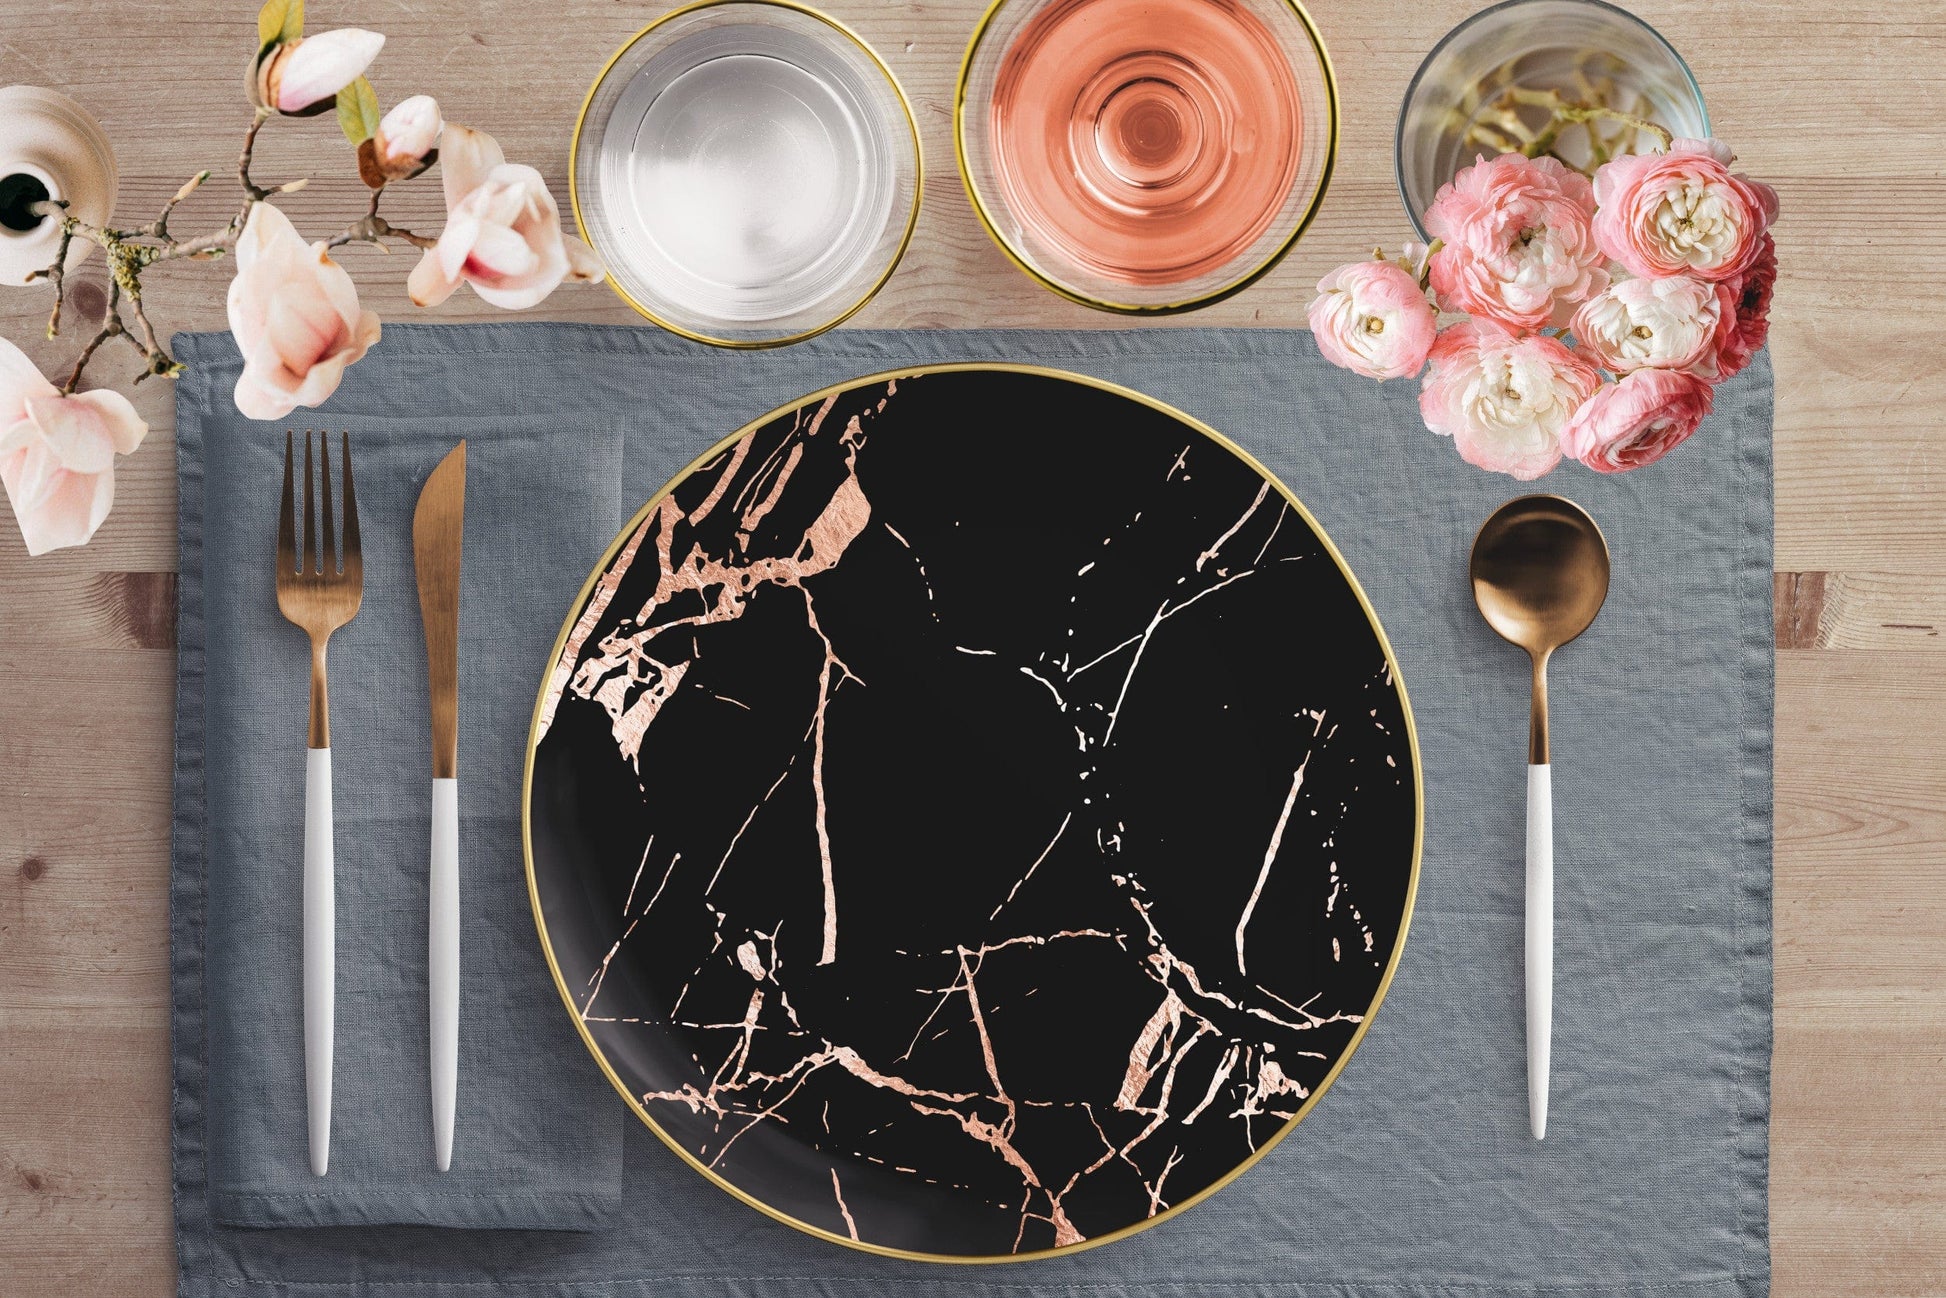 Kate McEnroe New York Dinner Plates in Luxurious Black & Gold Marble Veins with Gold Rim Plates Single 9820SINGLE